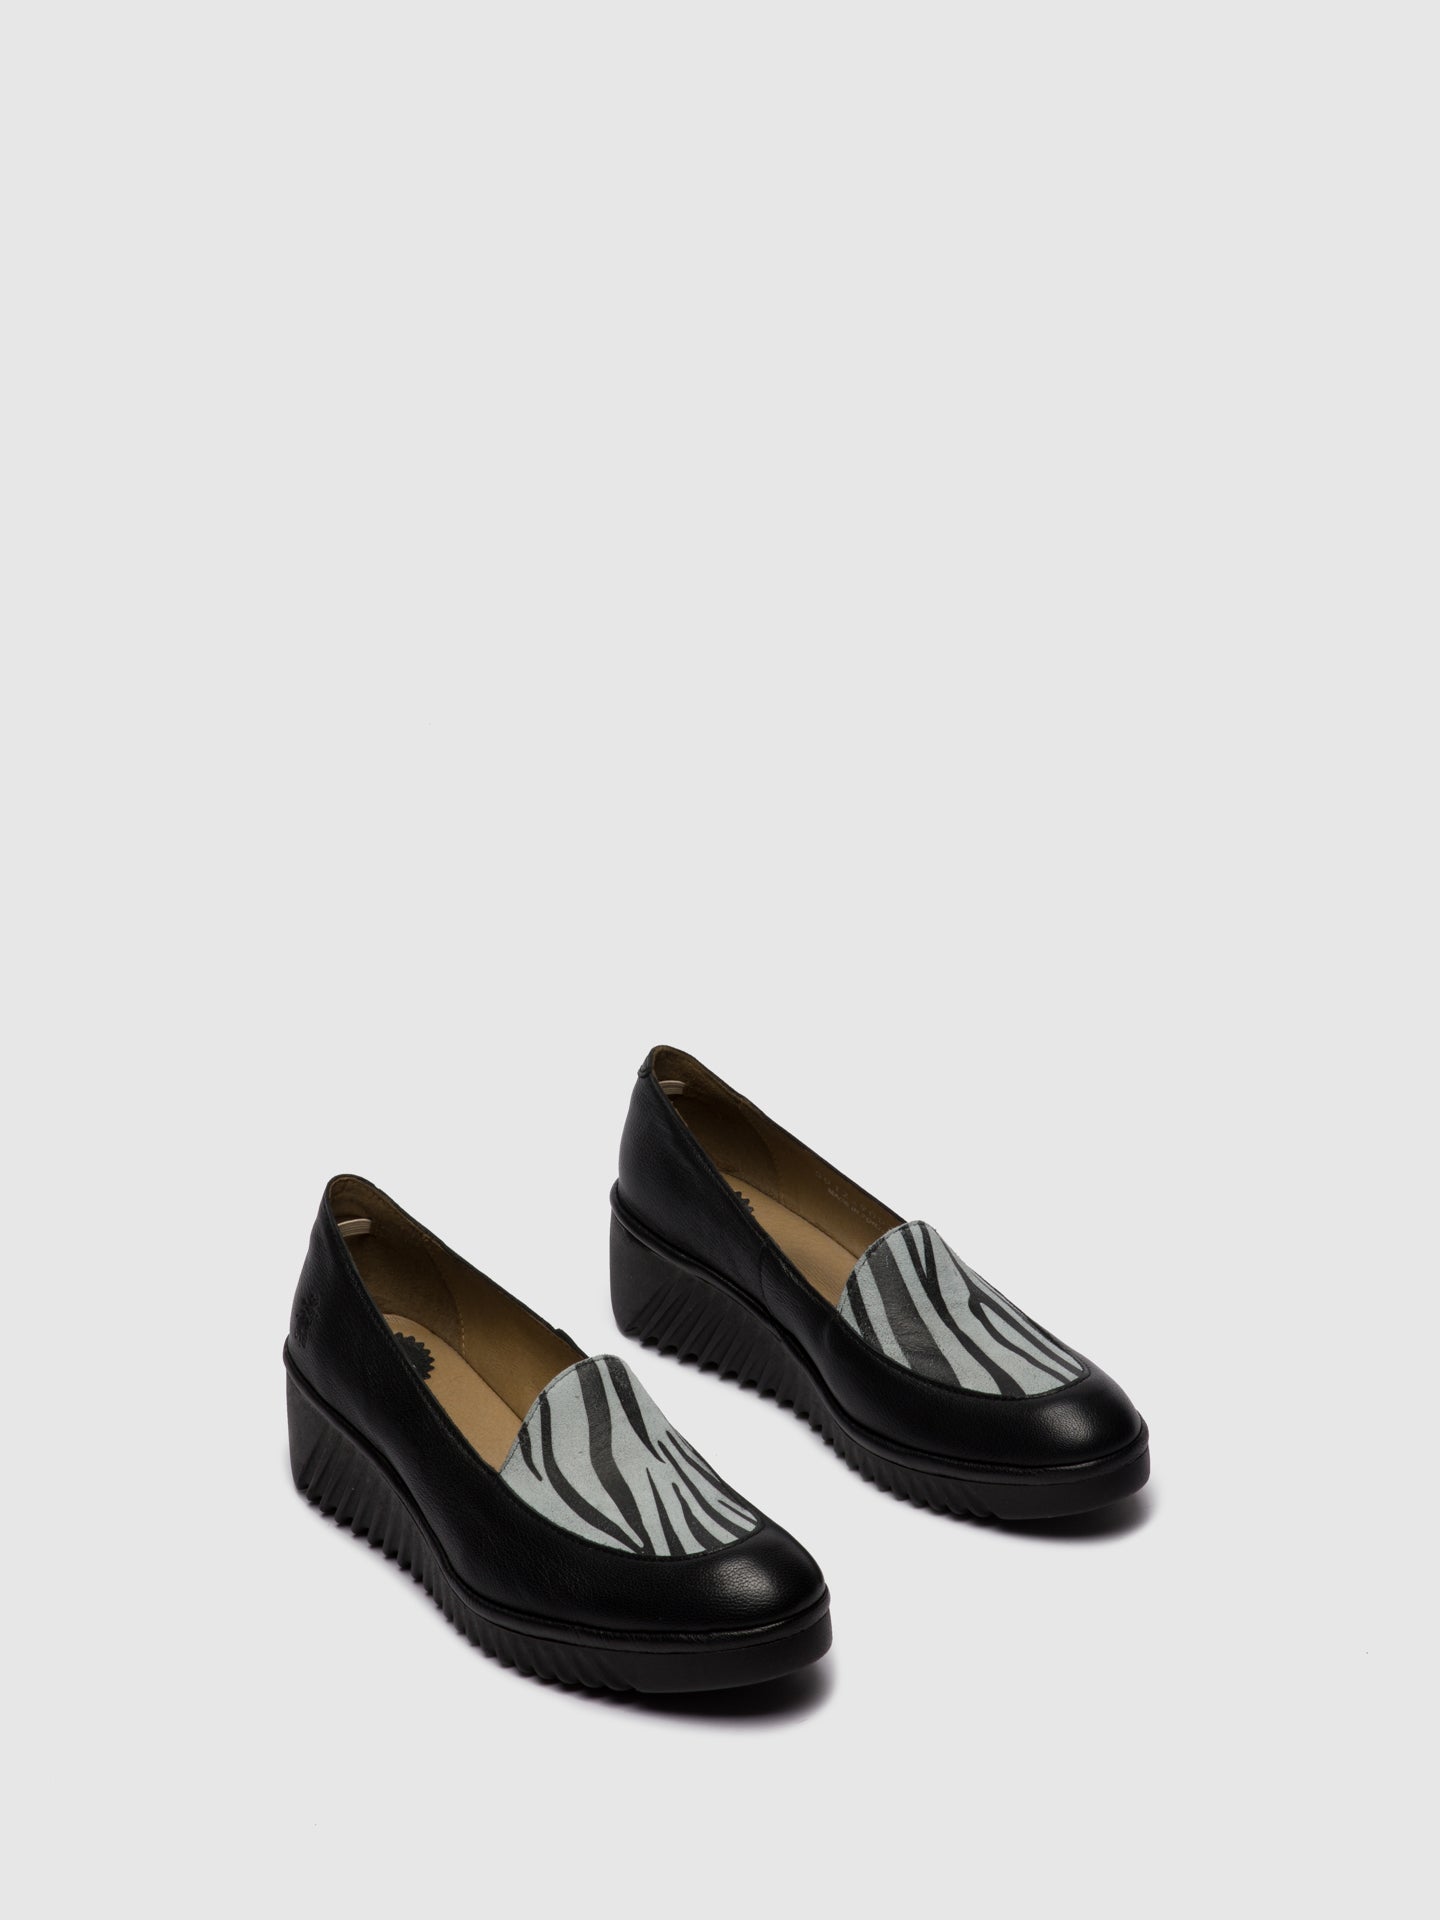 Fly London Loafers Shoes LUAN239FLY MOUSSE/ZEBRA BLACK/OFFWHITE